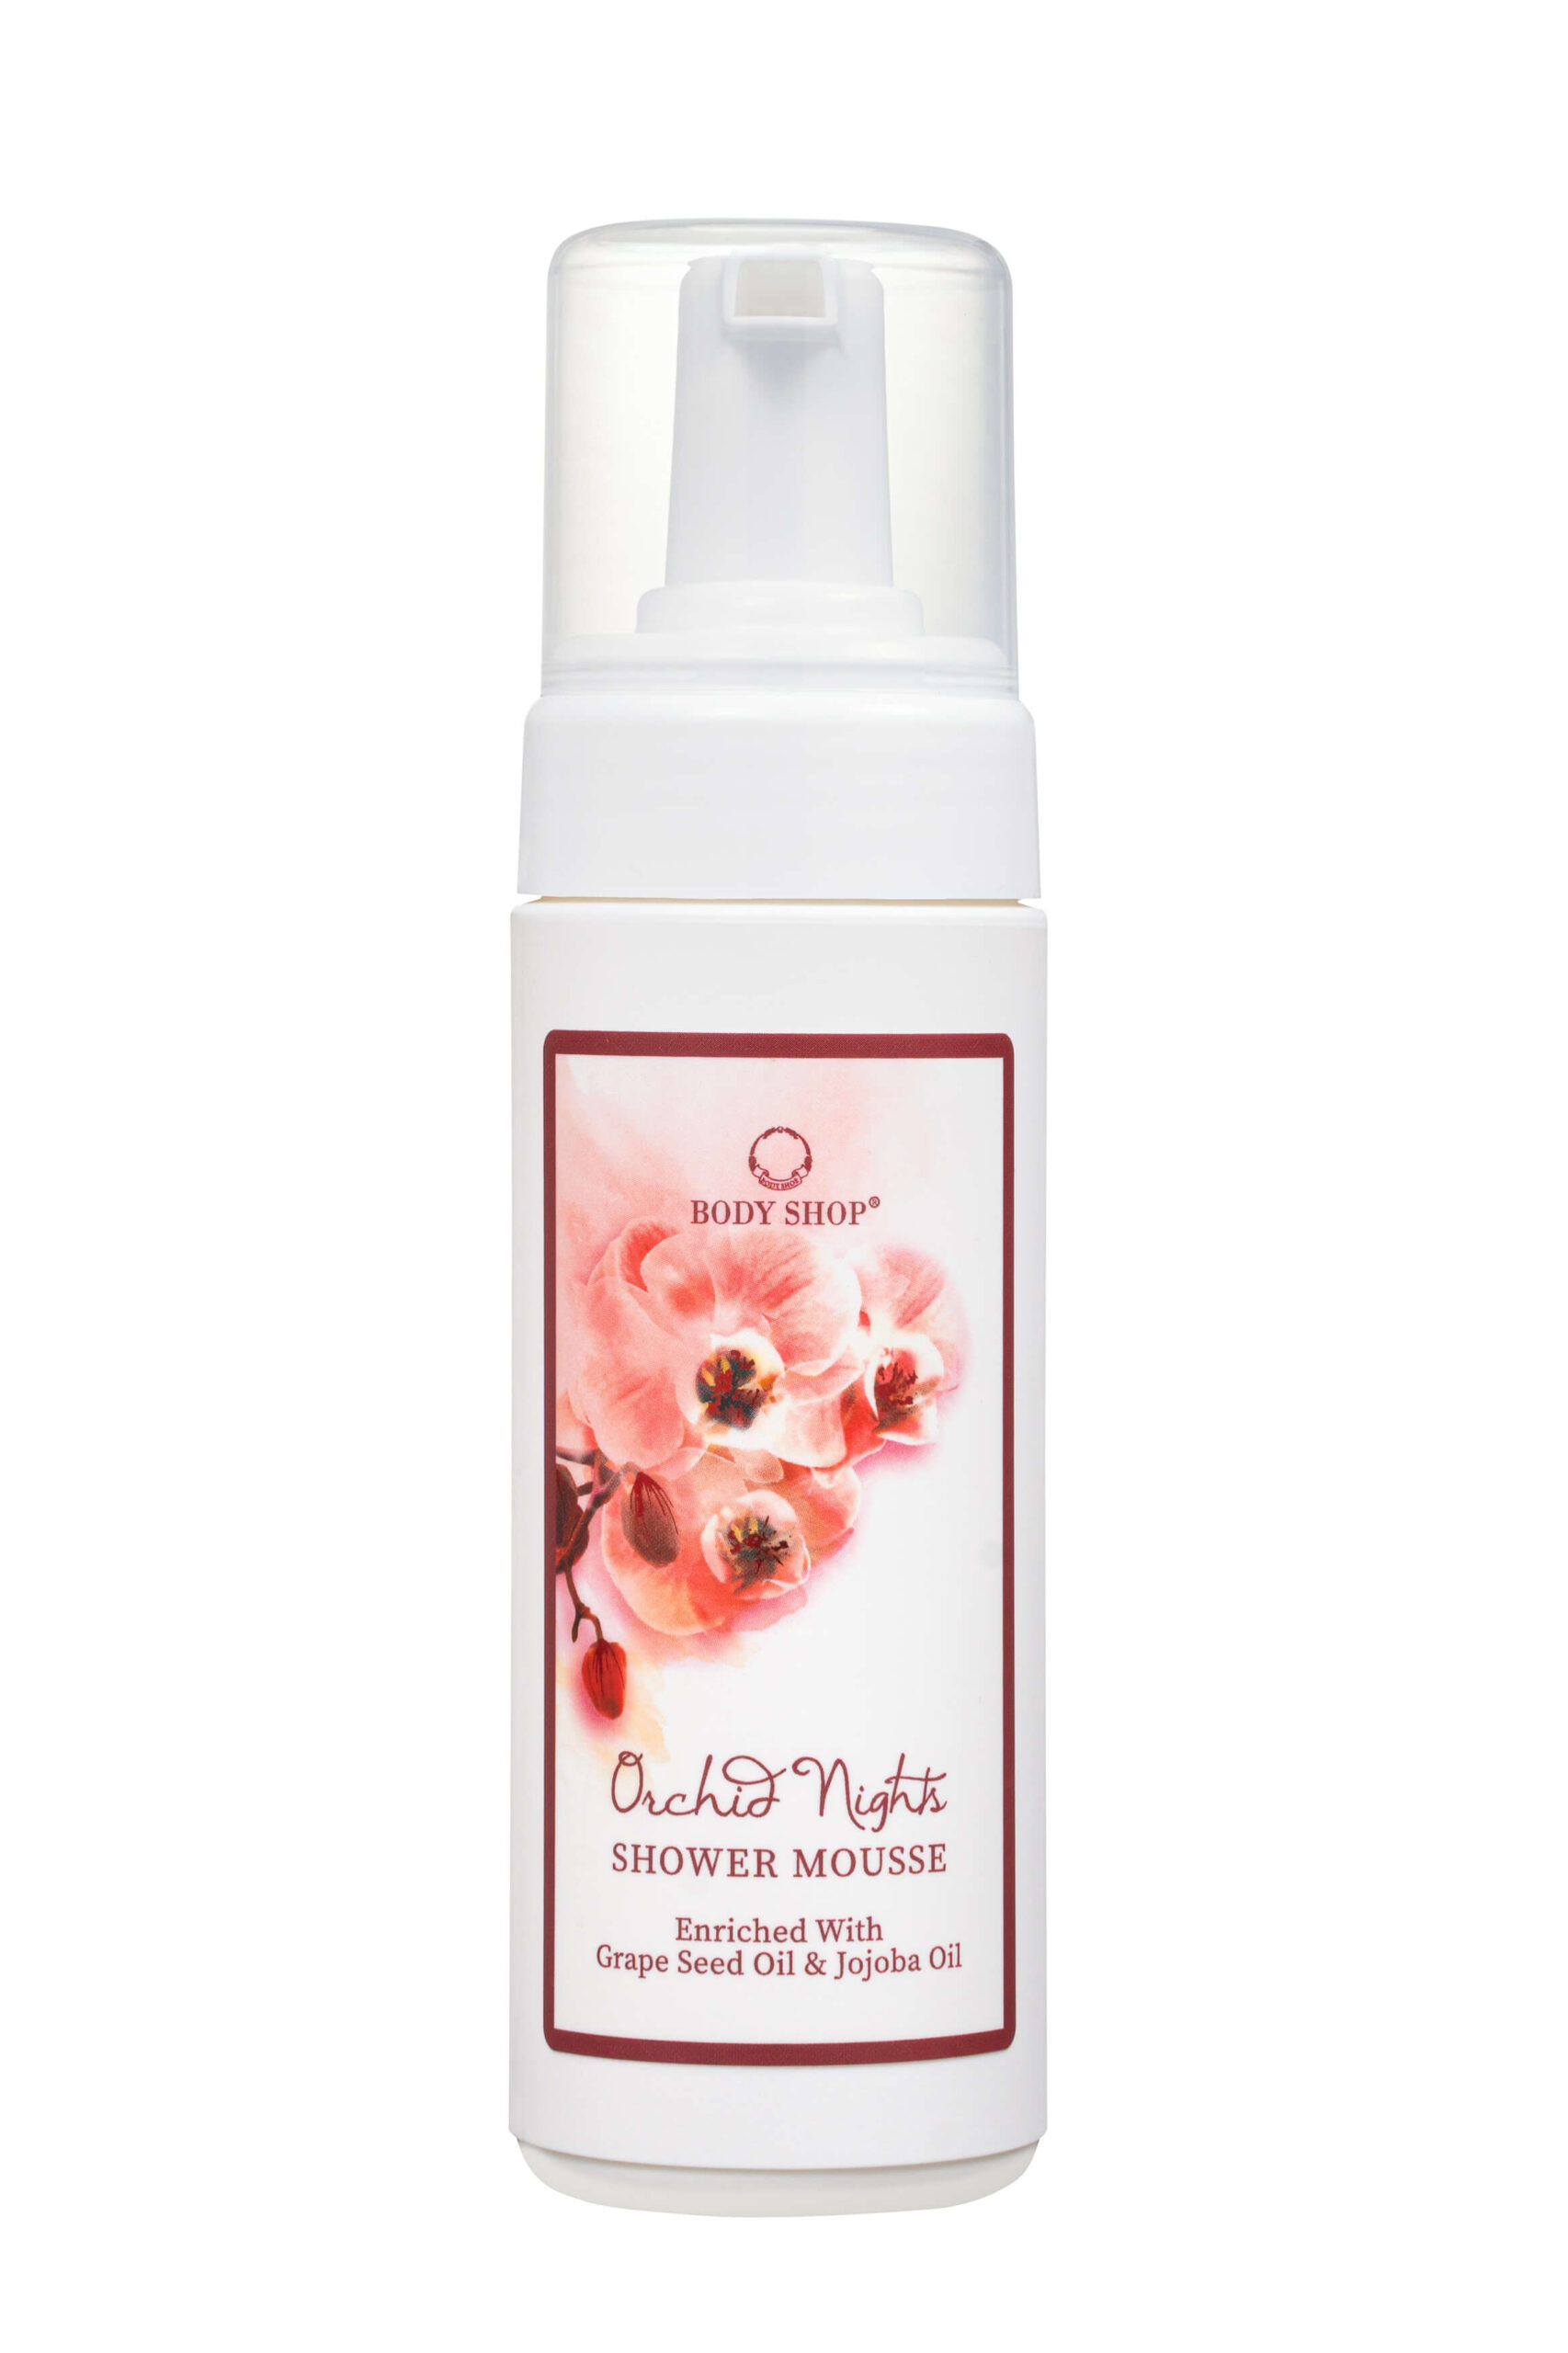 ORCHID NIGHTS SHOWER MOUSSE Enriched with Grape seed oil & jojoba oil 150 ml